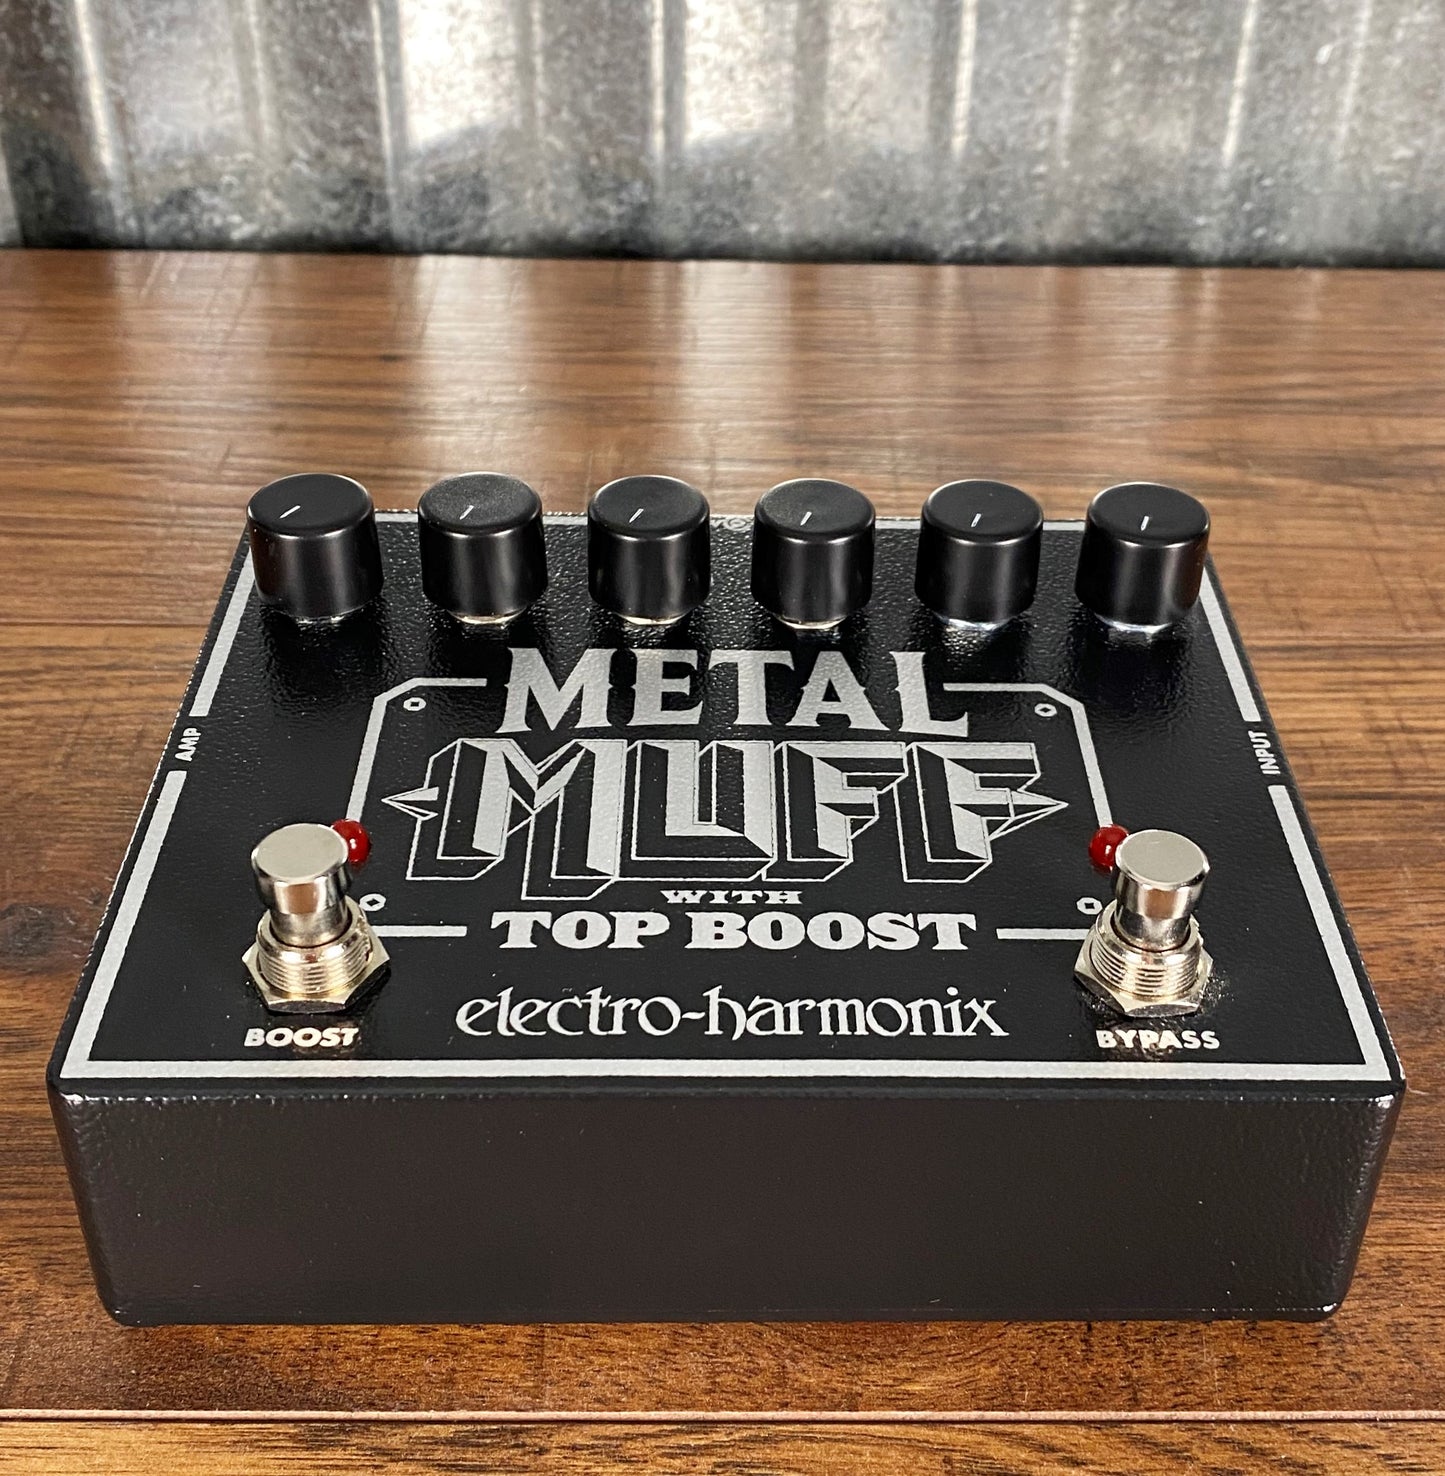 Electro-Harmonix EHX Metal Muff with Top Boost Distortion Guitar Effect Pedal Demo